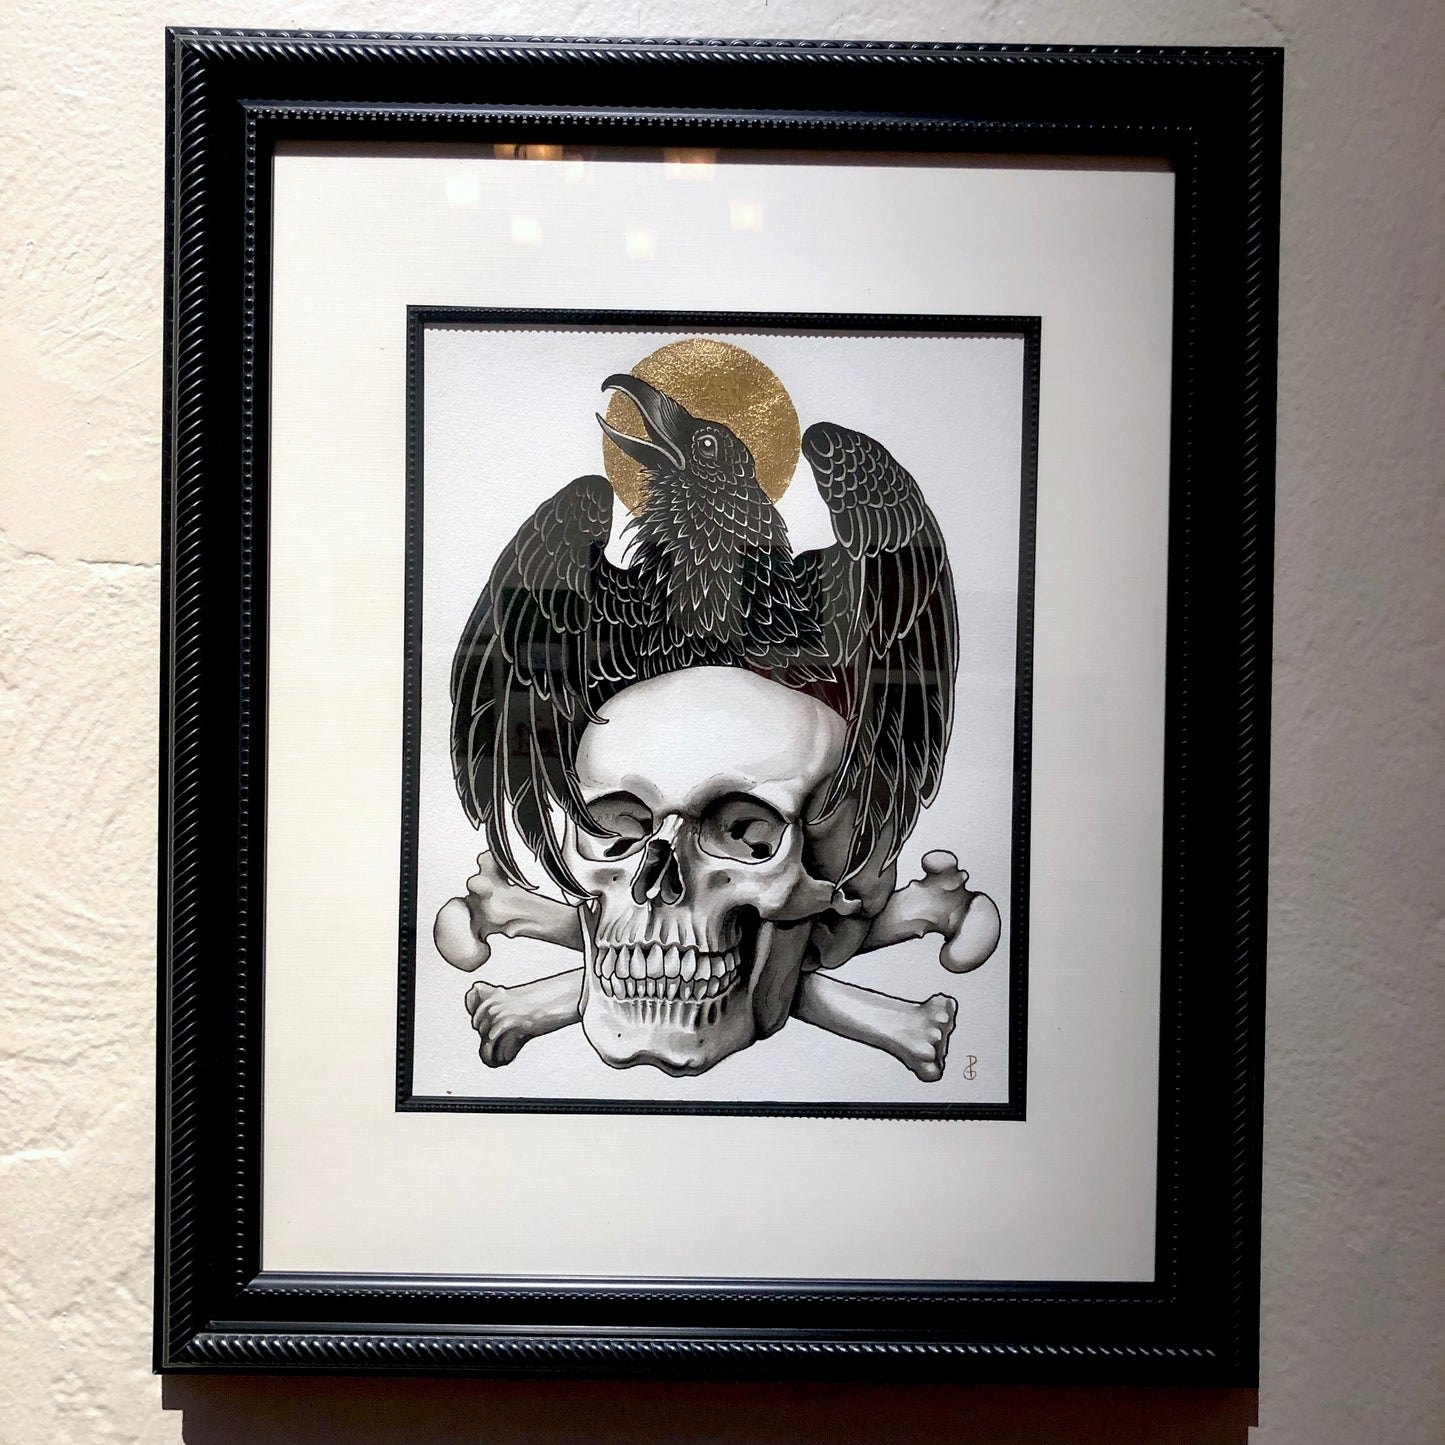 Phil Geck "Crow and Skull" (2021)